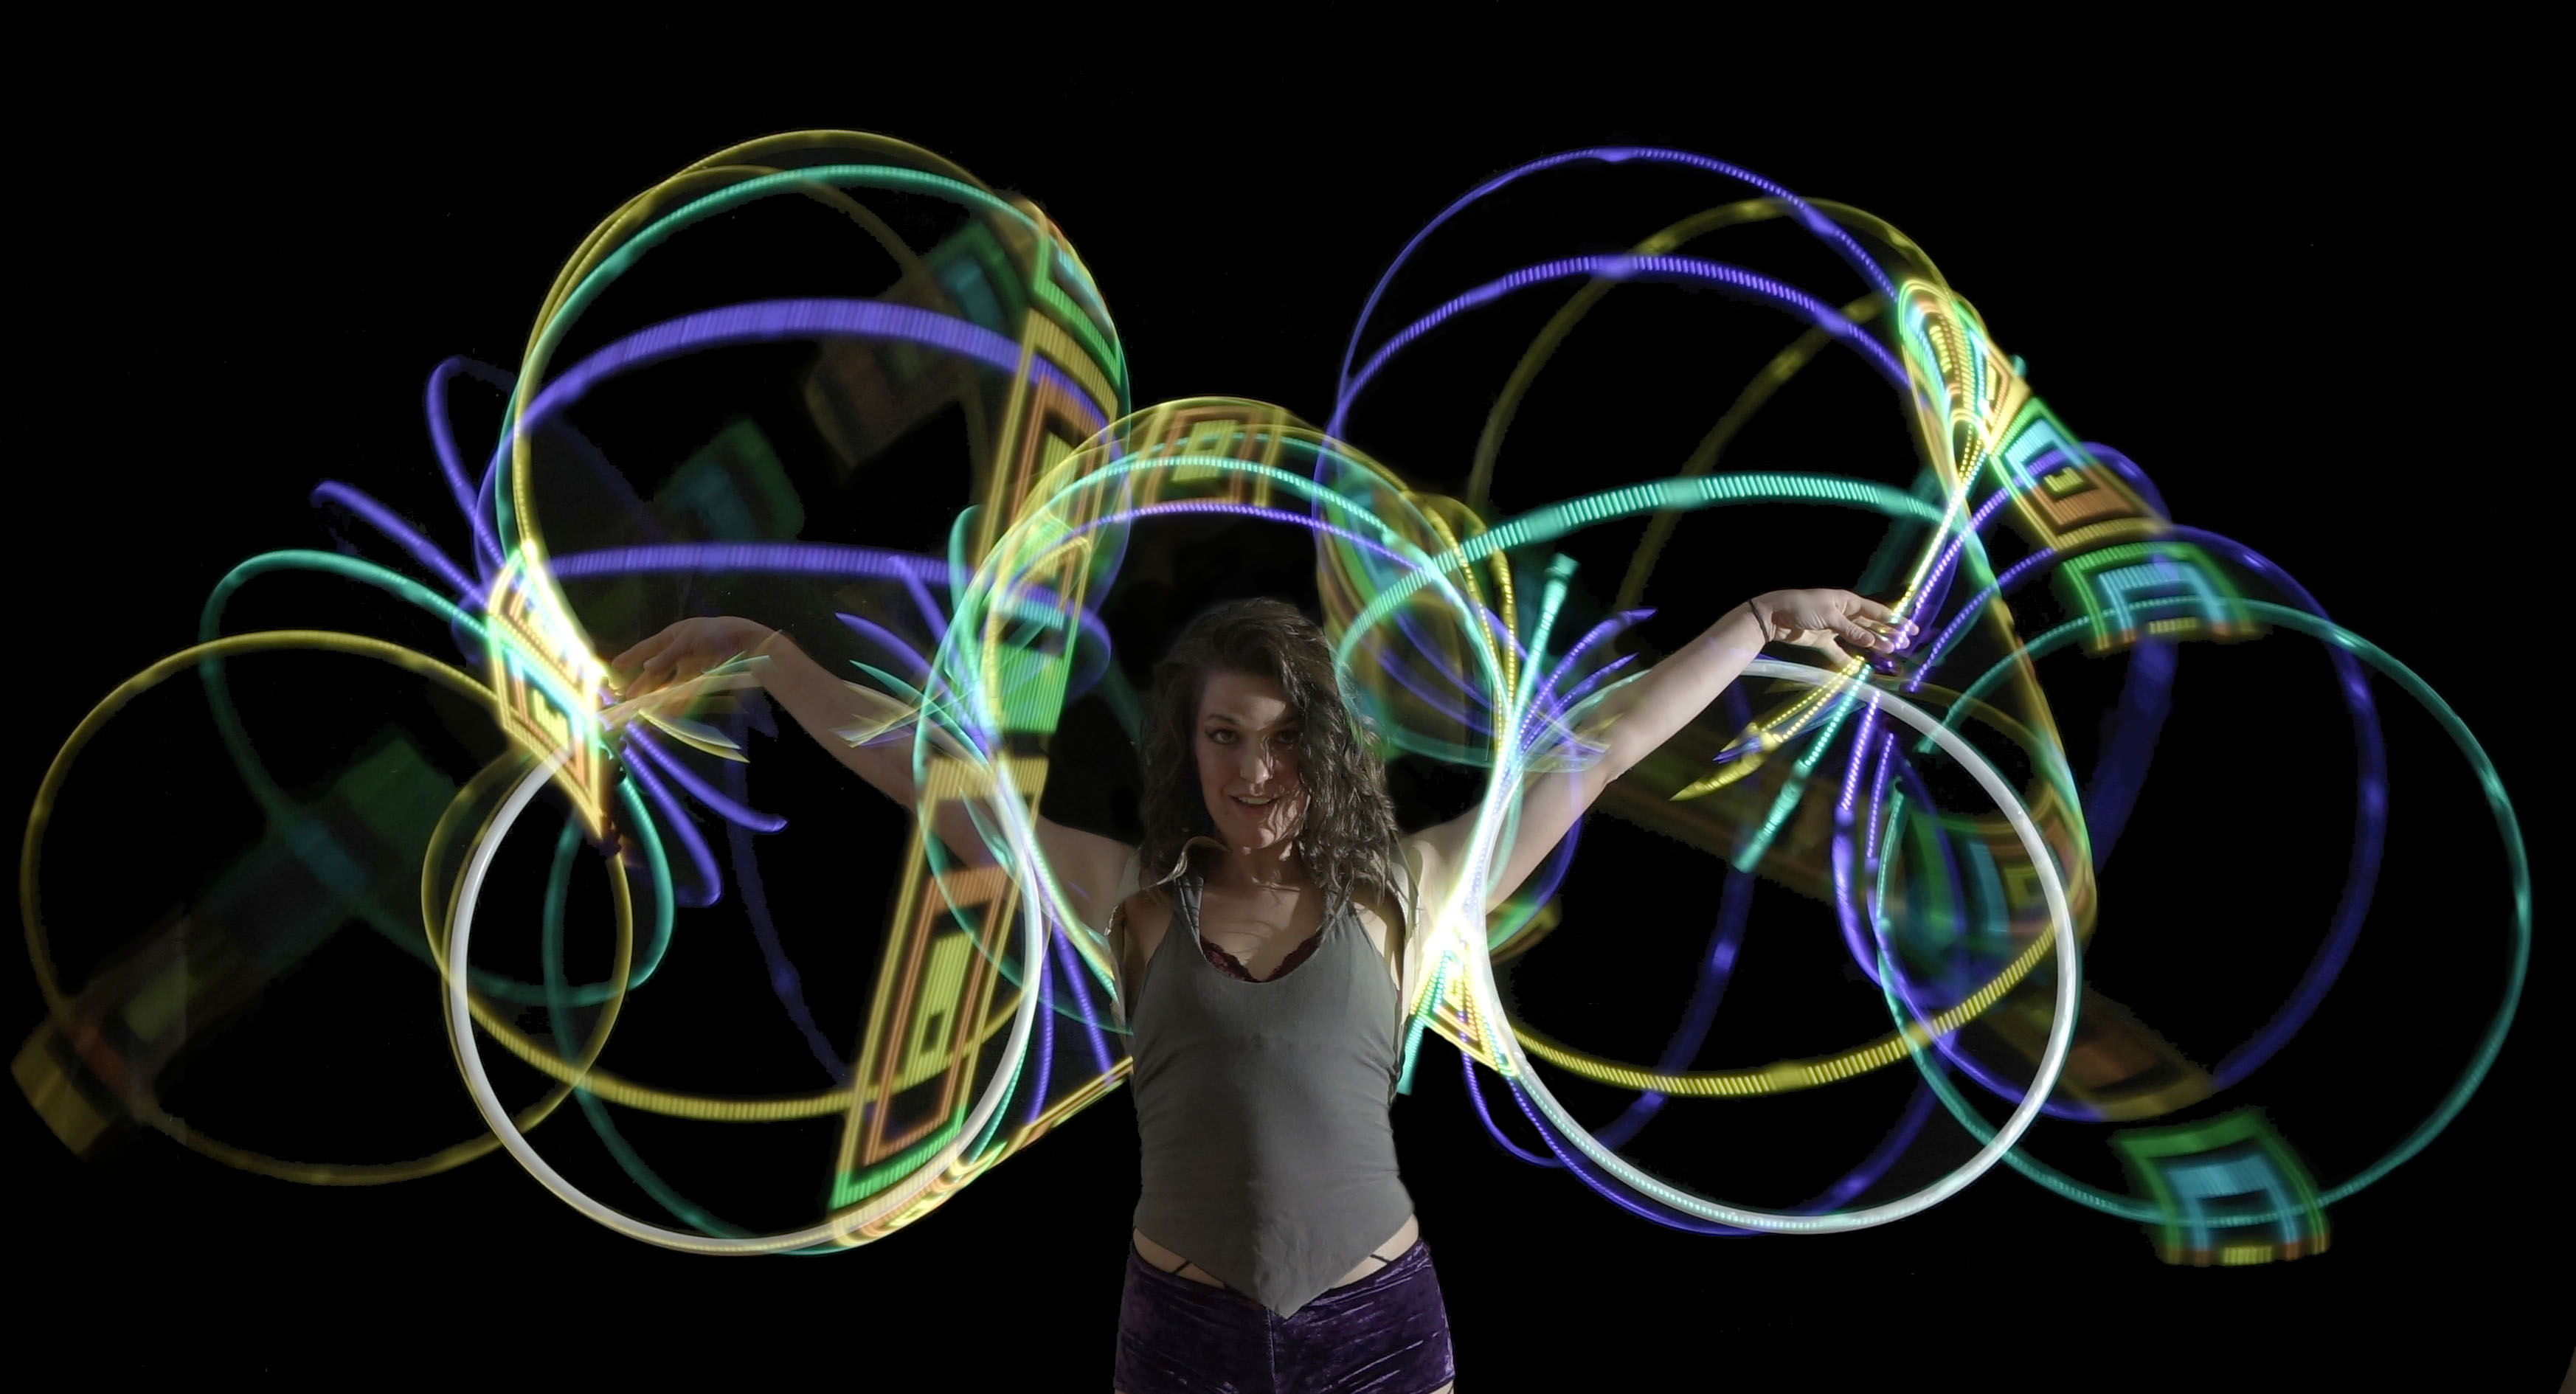 About PsiHoops LED Smart Hoops - Psihoops | The Original LED Smart Hula Hoop | Smart Hoops | LED ...